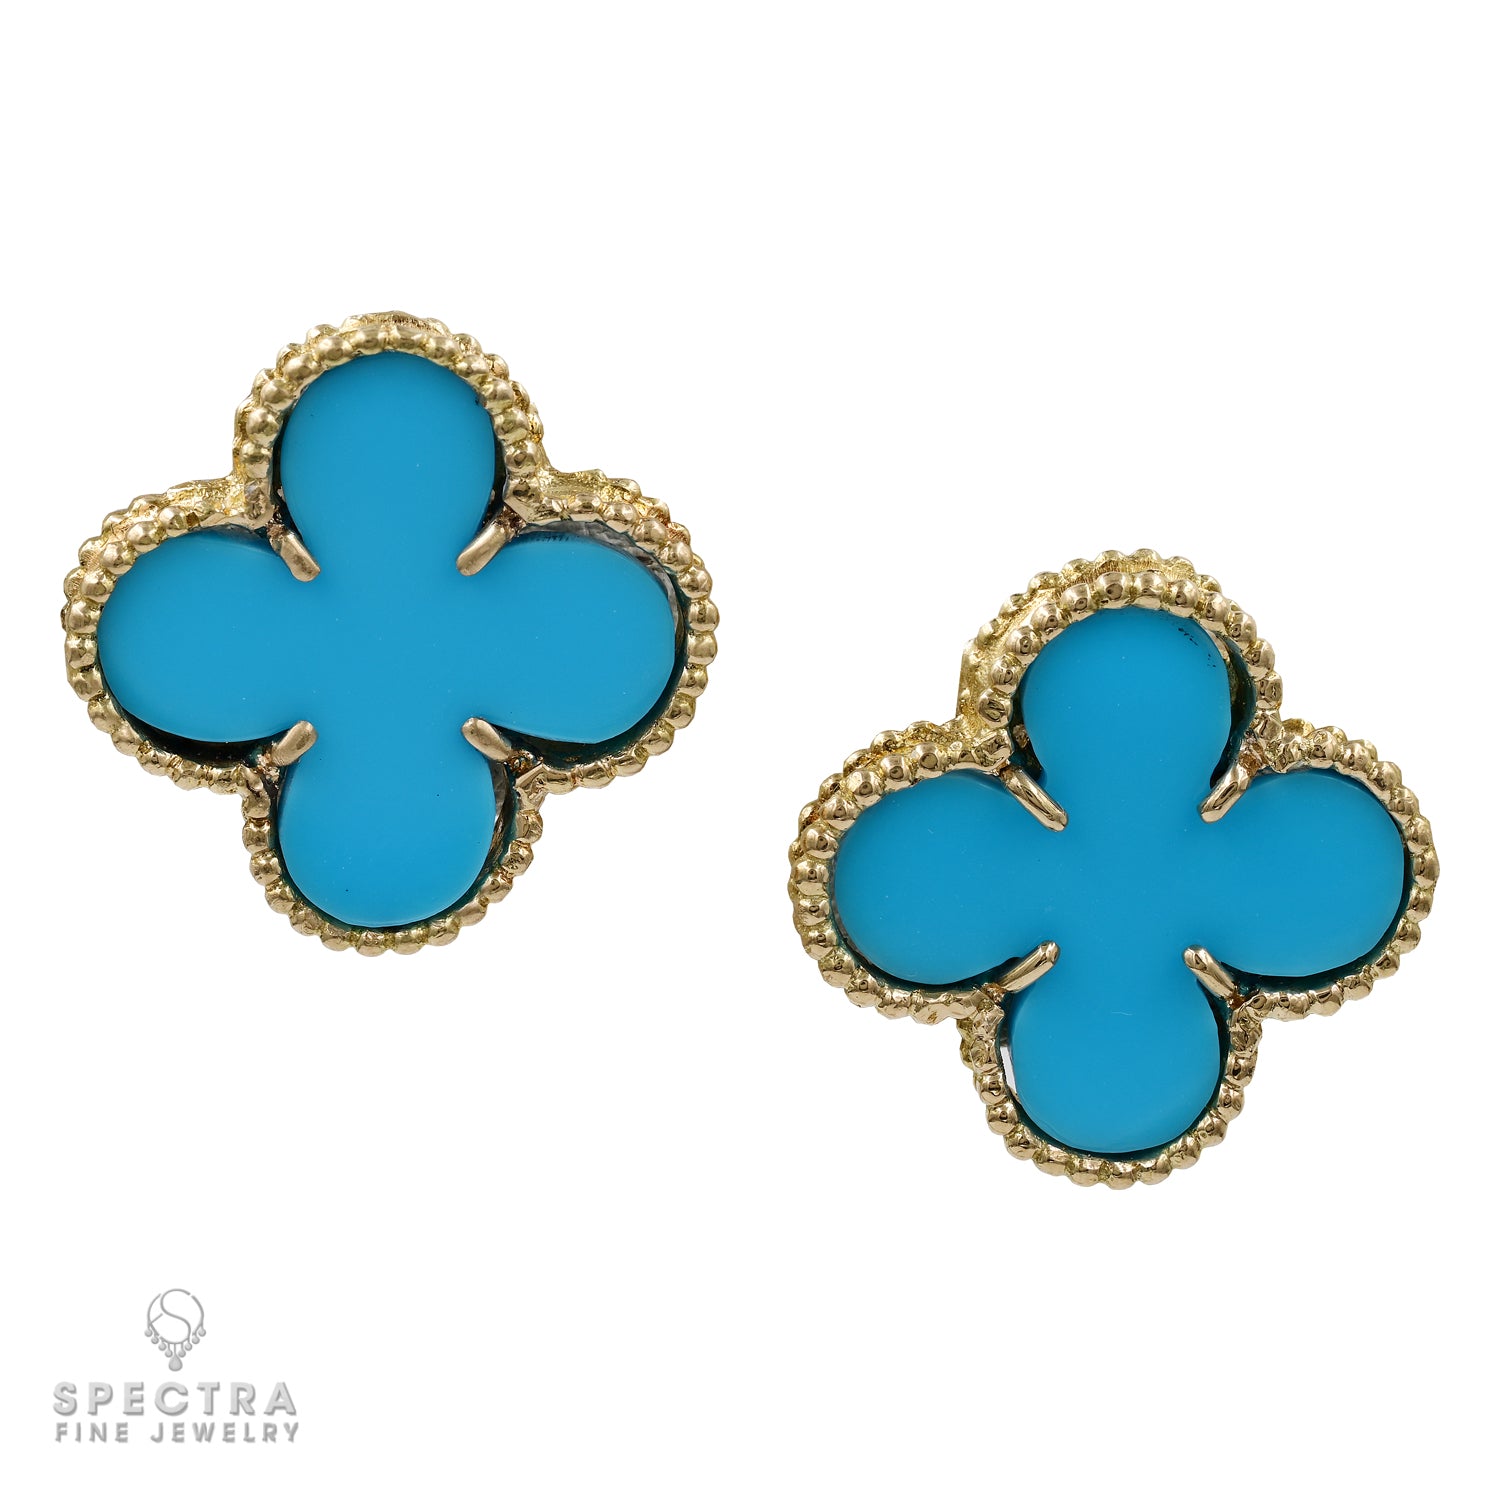 Turquoise Color Clover Earrings in 18kt Yellow Gold